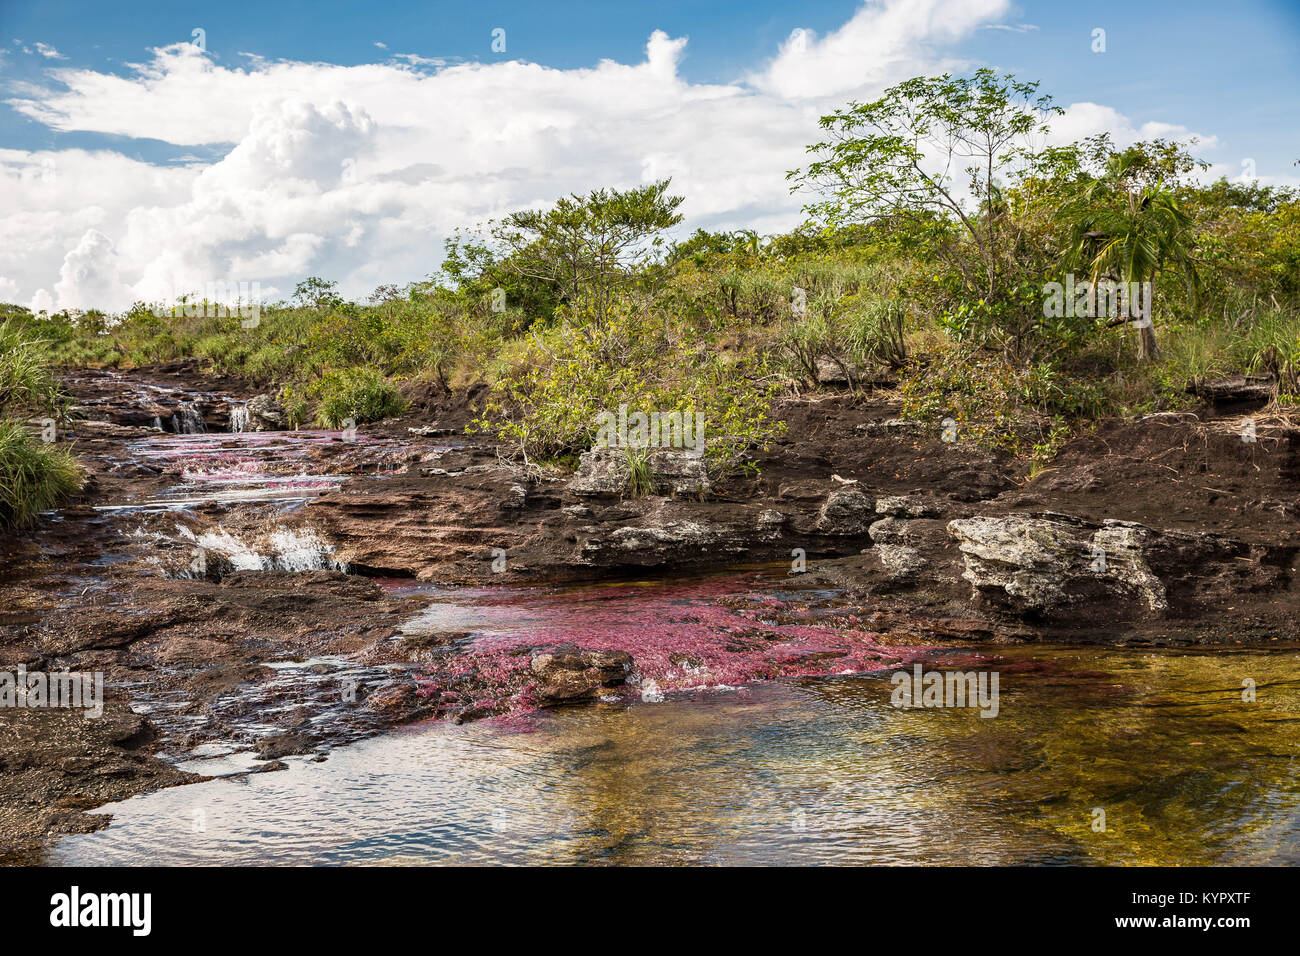 La Macarena, an isolated town in Colombia's Meta department, is famous for Caño Cristales, the River of Five Colors. Stock Photo